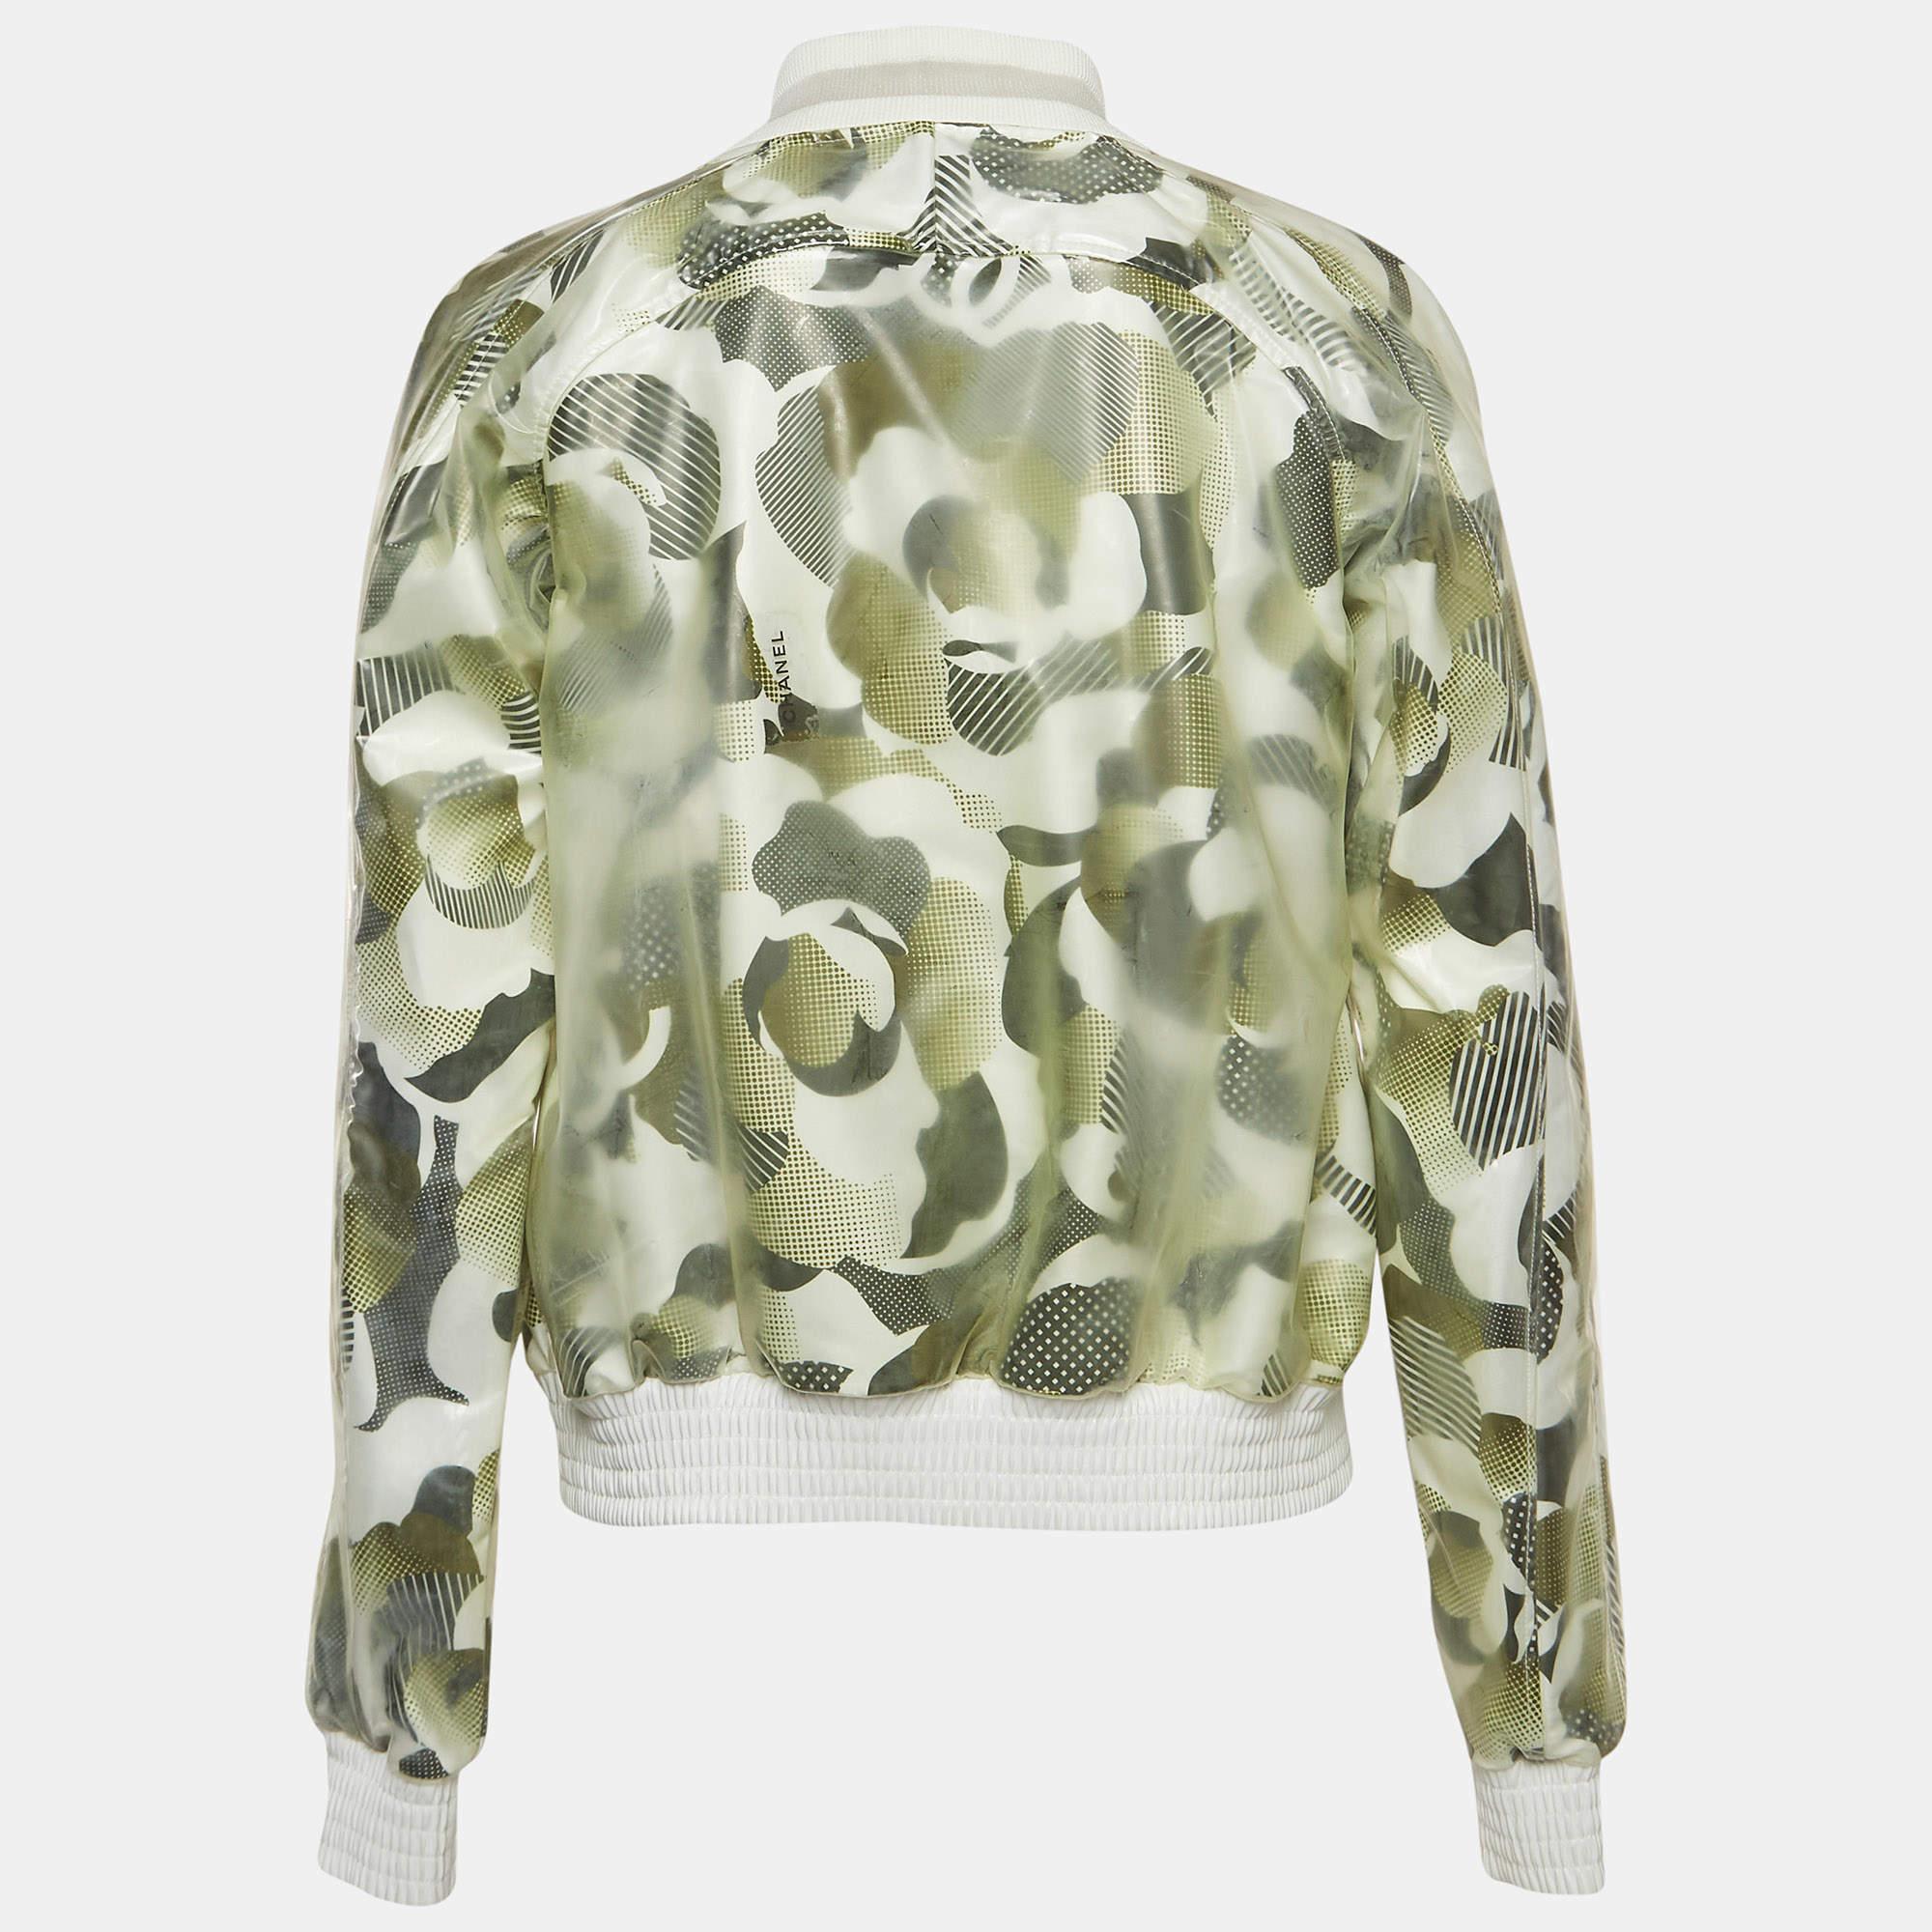 Step into sophistication with the Chanel bomber jacket. Crafted with meticulous detail, this piece boasts a rich dark green hue adorned with subtle prints, exuding elegance and modernity. The synthetic vinyl material ensures durability and a sleek